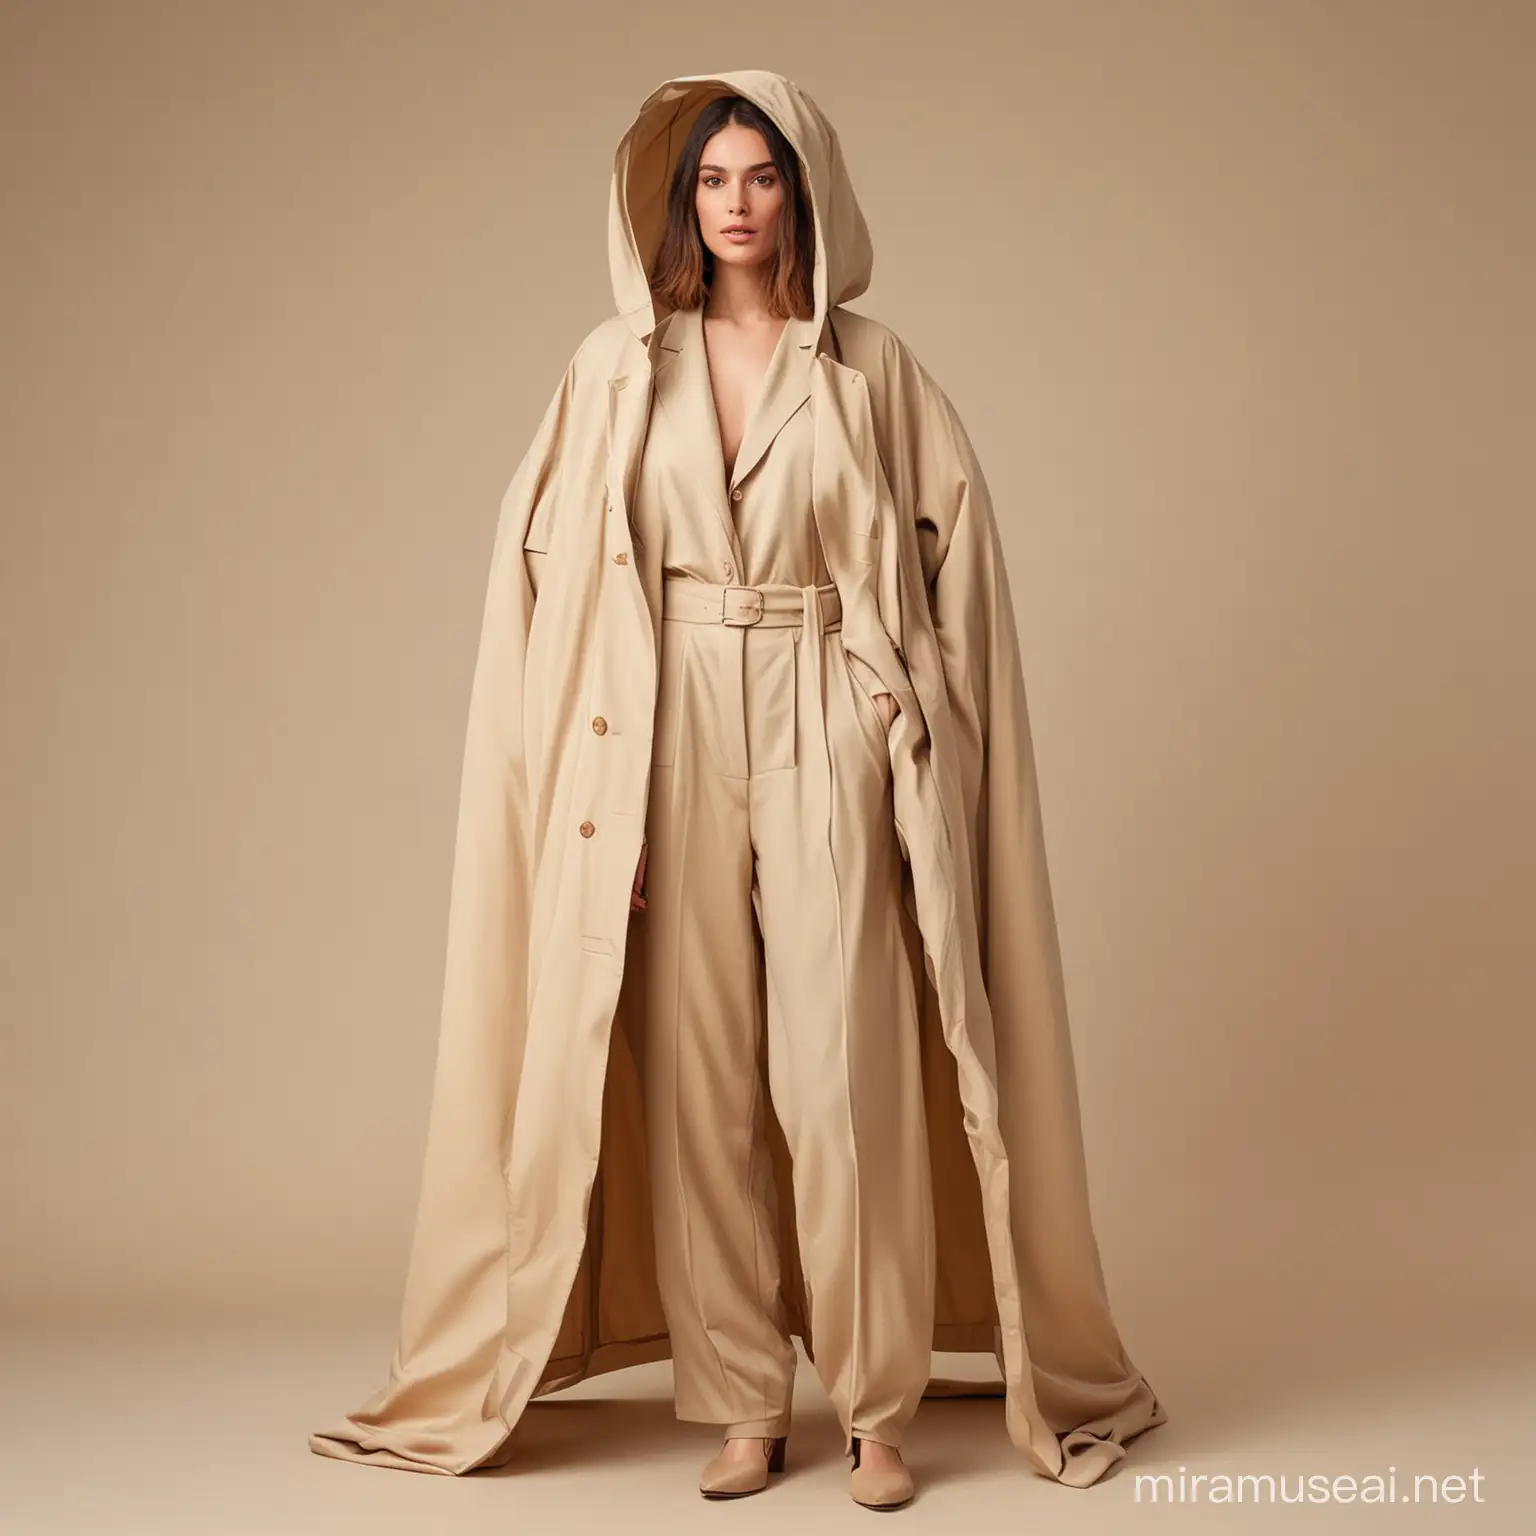 Woman dressed in a oversize, beige suit looking lige she is wearing a tent